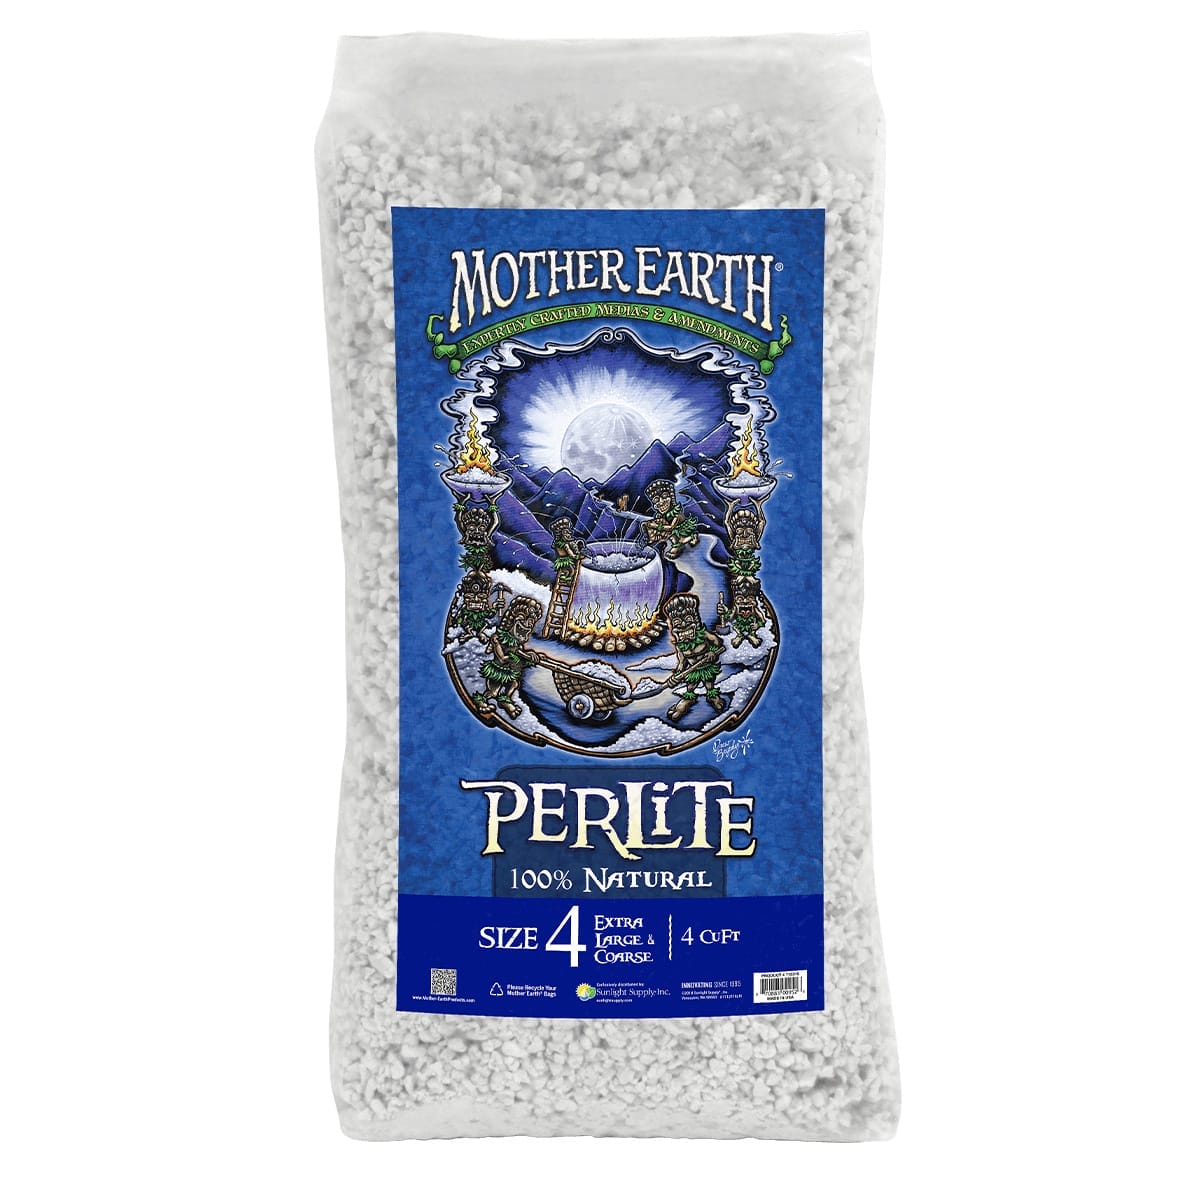 Mother Earth Perlite #4 4cuft